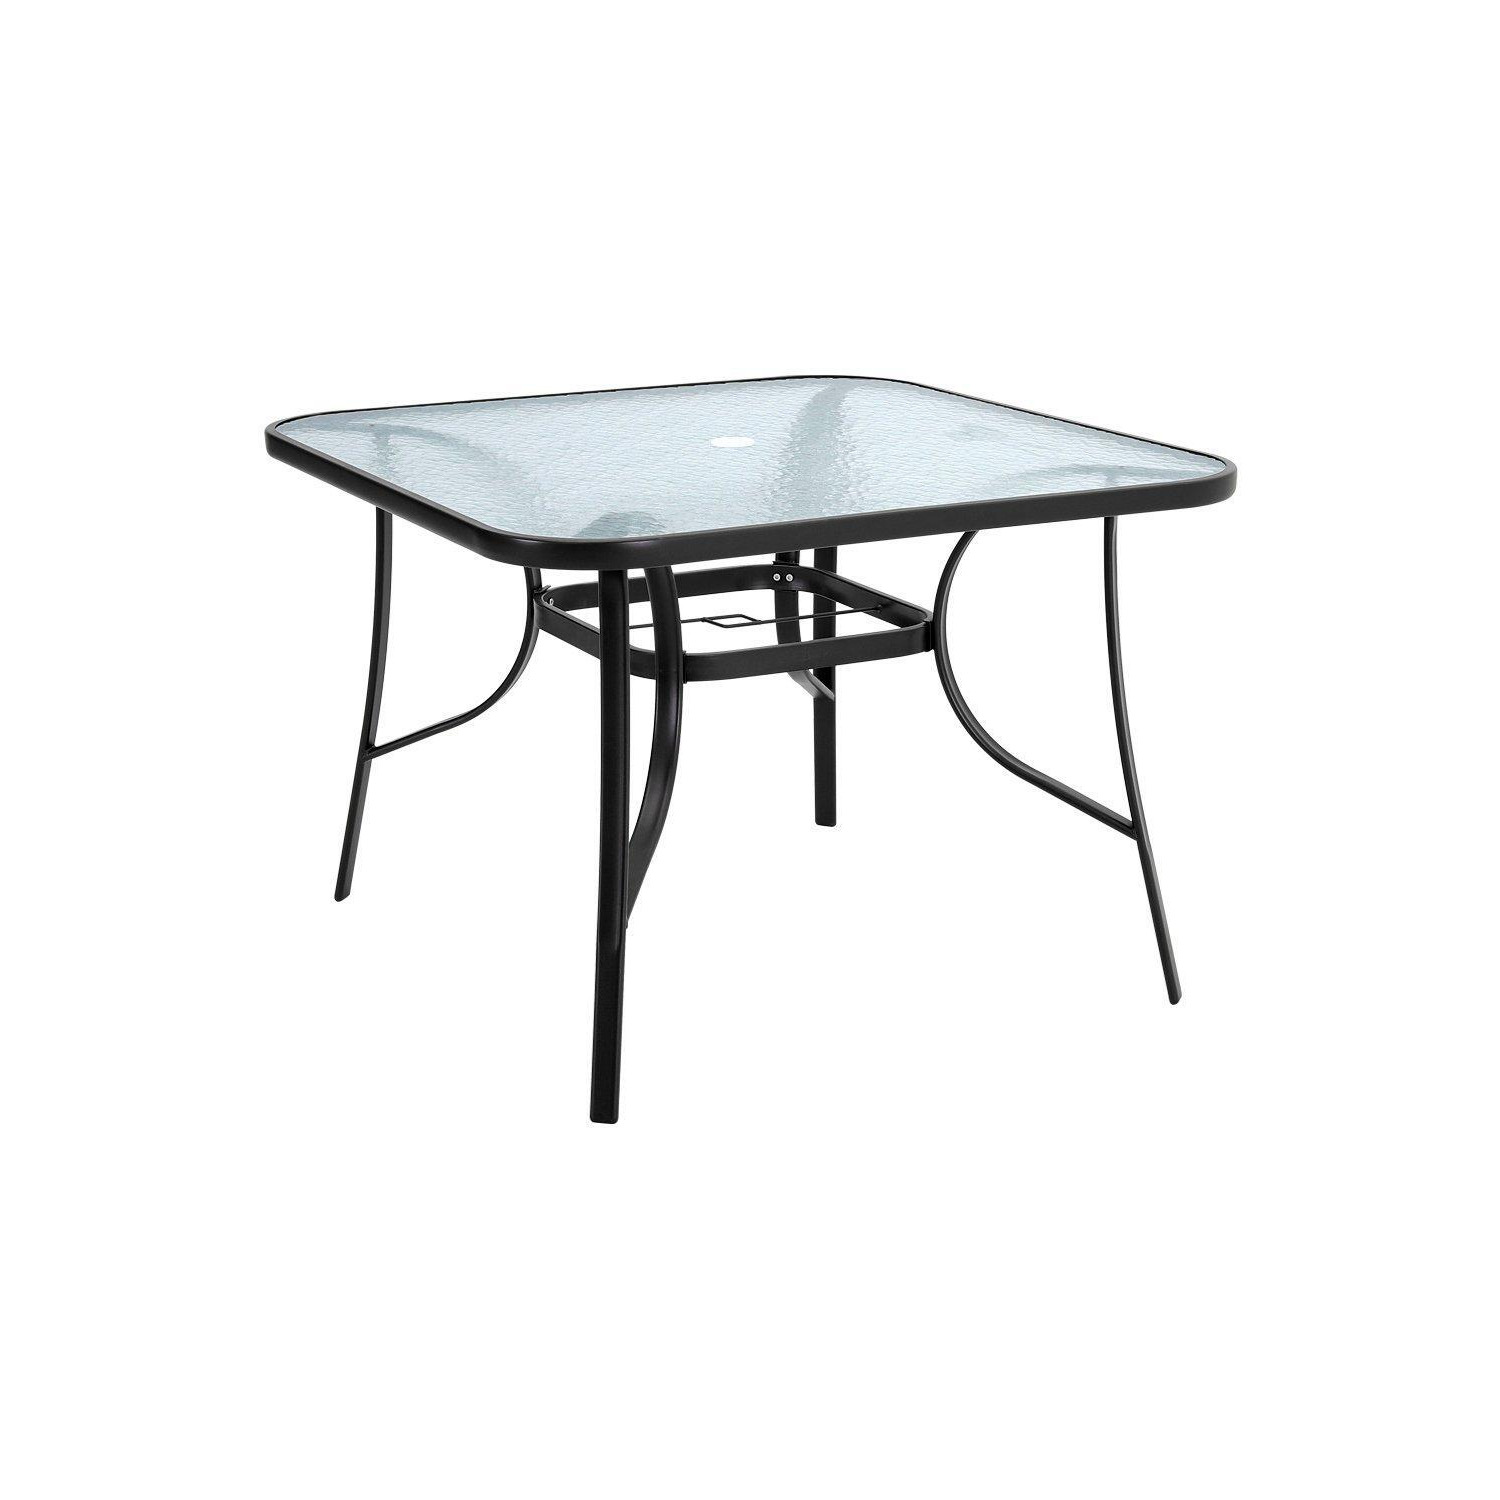 Outdoor Tempered Glass Garden Dining Table - image 1